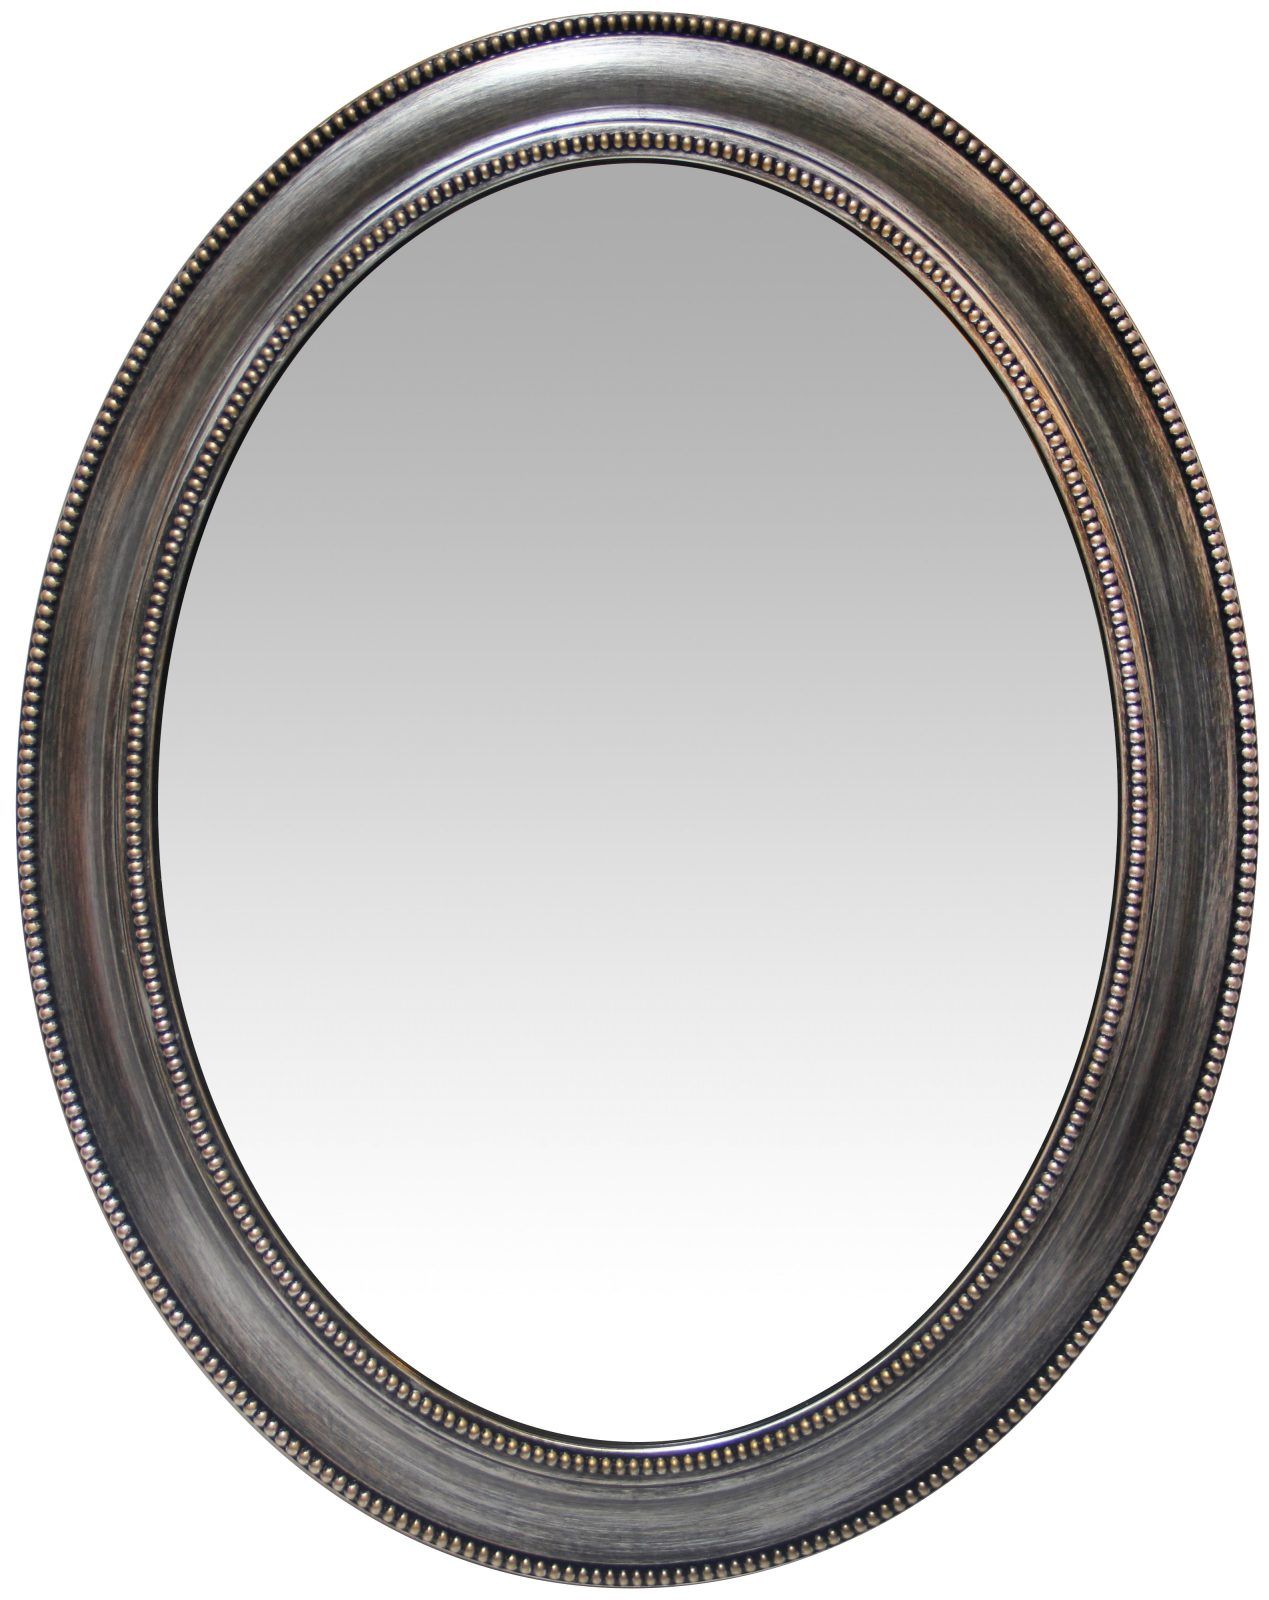 30 Inch Sonore Antique Silver Oval Wall Mirror| Clockroom Within Antique Silver Round Wall Mirrors (View 15 of 15)